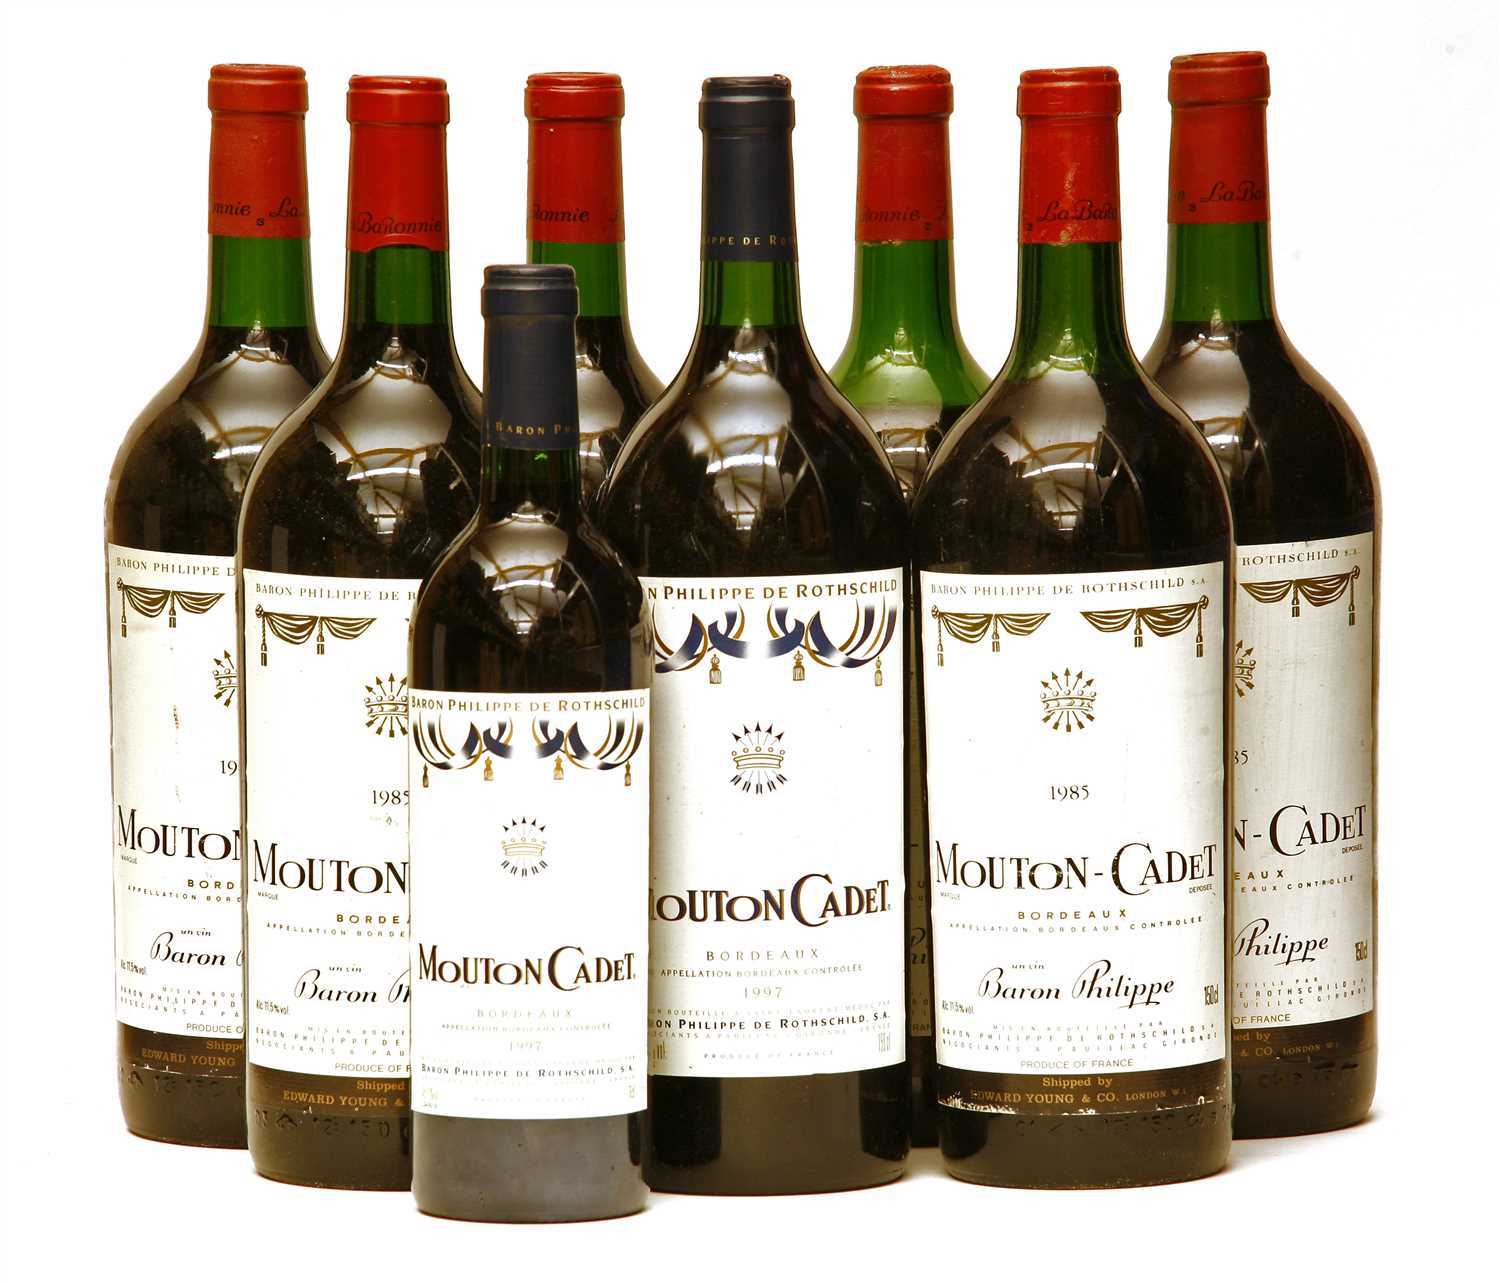 Lot 339 - Baron Philippe de Rothschild, Mouton-Cadet, 1985, six magnums and 1997, one magnum and one bottle